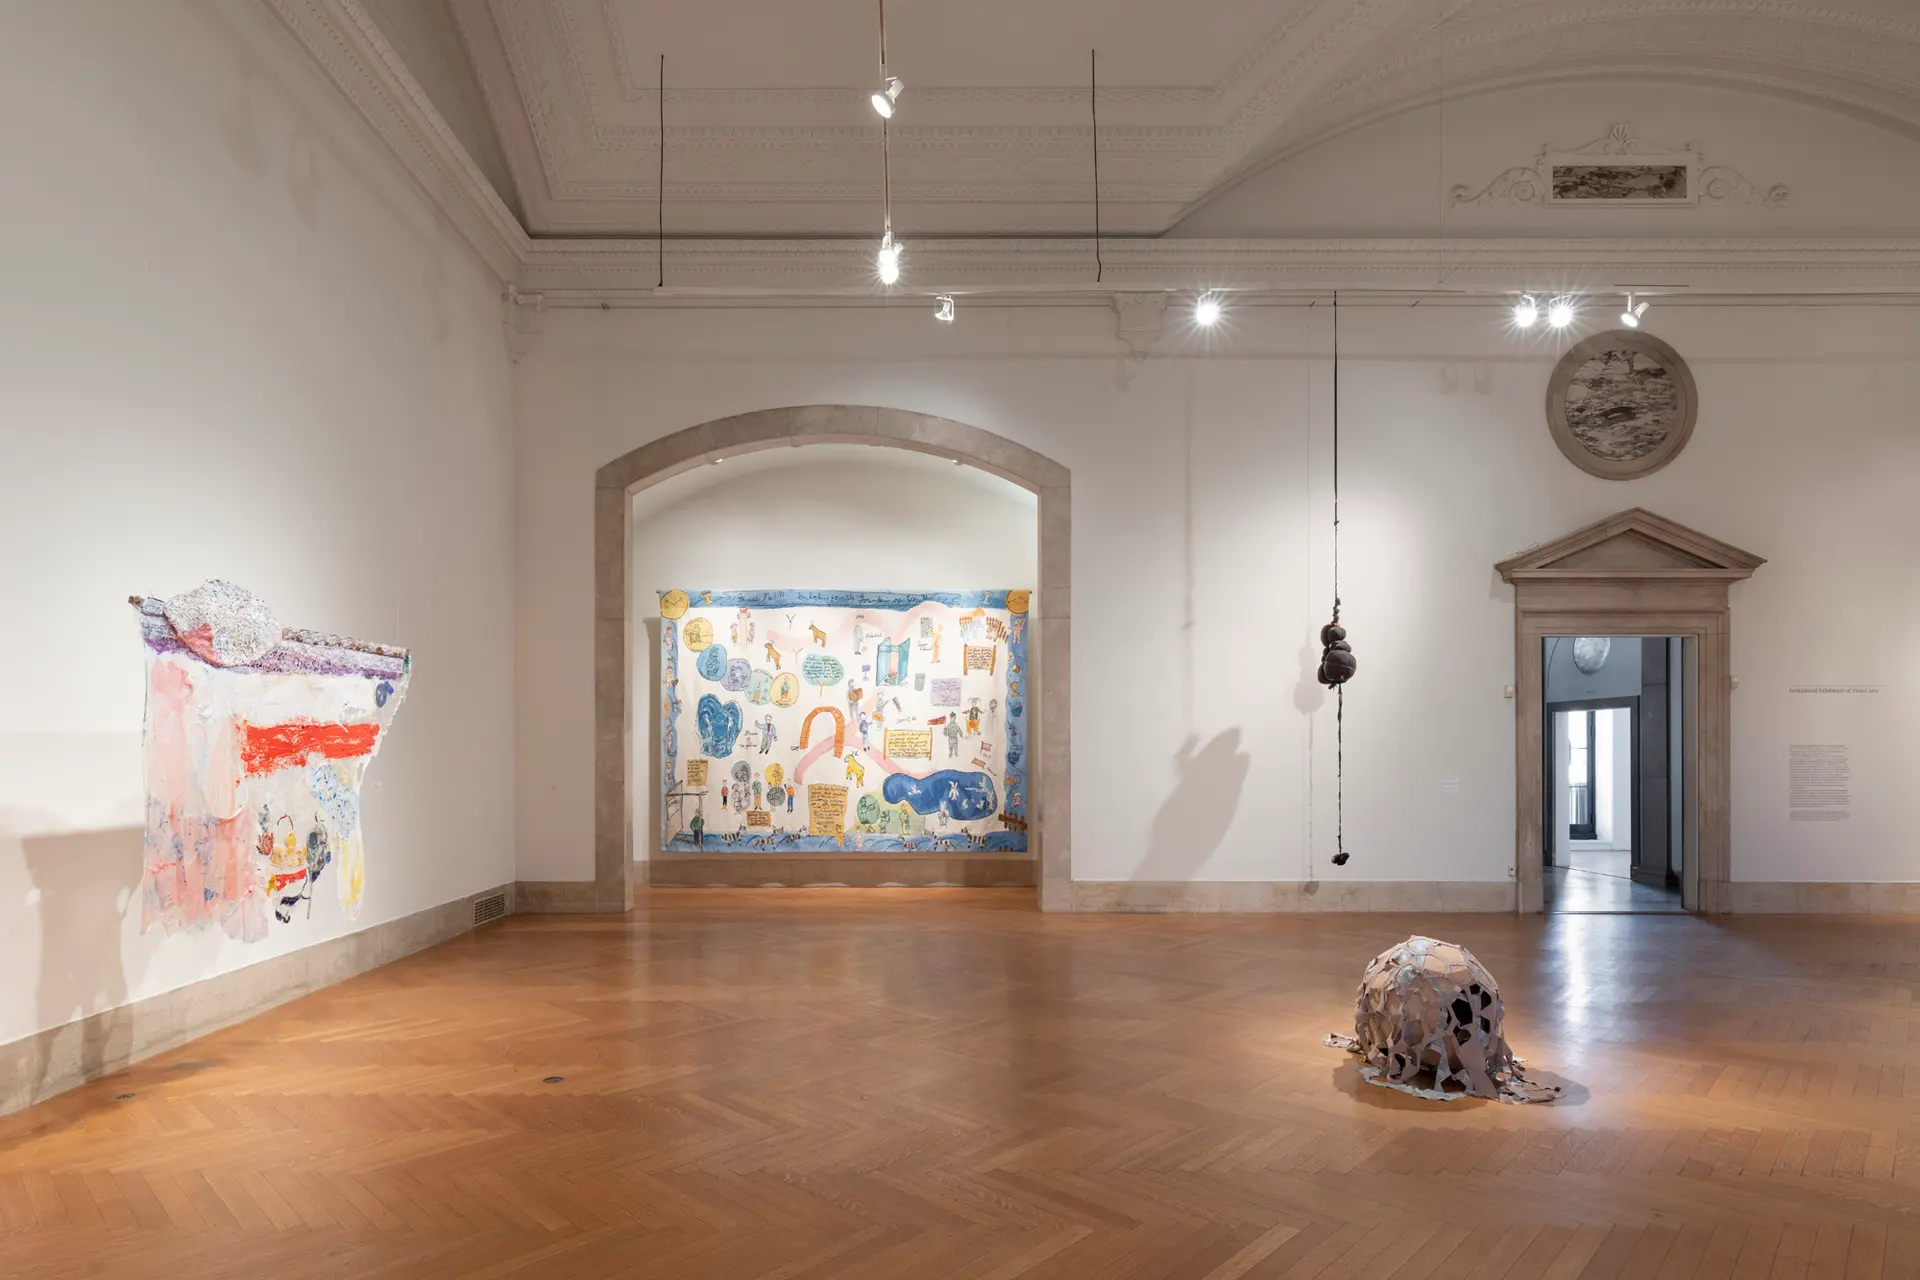 A small abstract sculpture sits on the floor of the center of a gallery. Against a wall to the left, a painting on white, irregular fabric is suspended from the ceiling. Straight ahead is a large painting framed by an arched stone entryway and an abstract sculpture suspended from the ceiling.